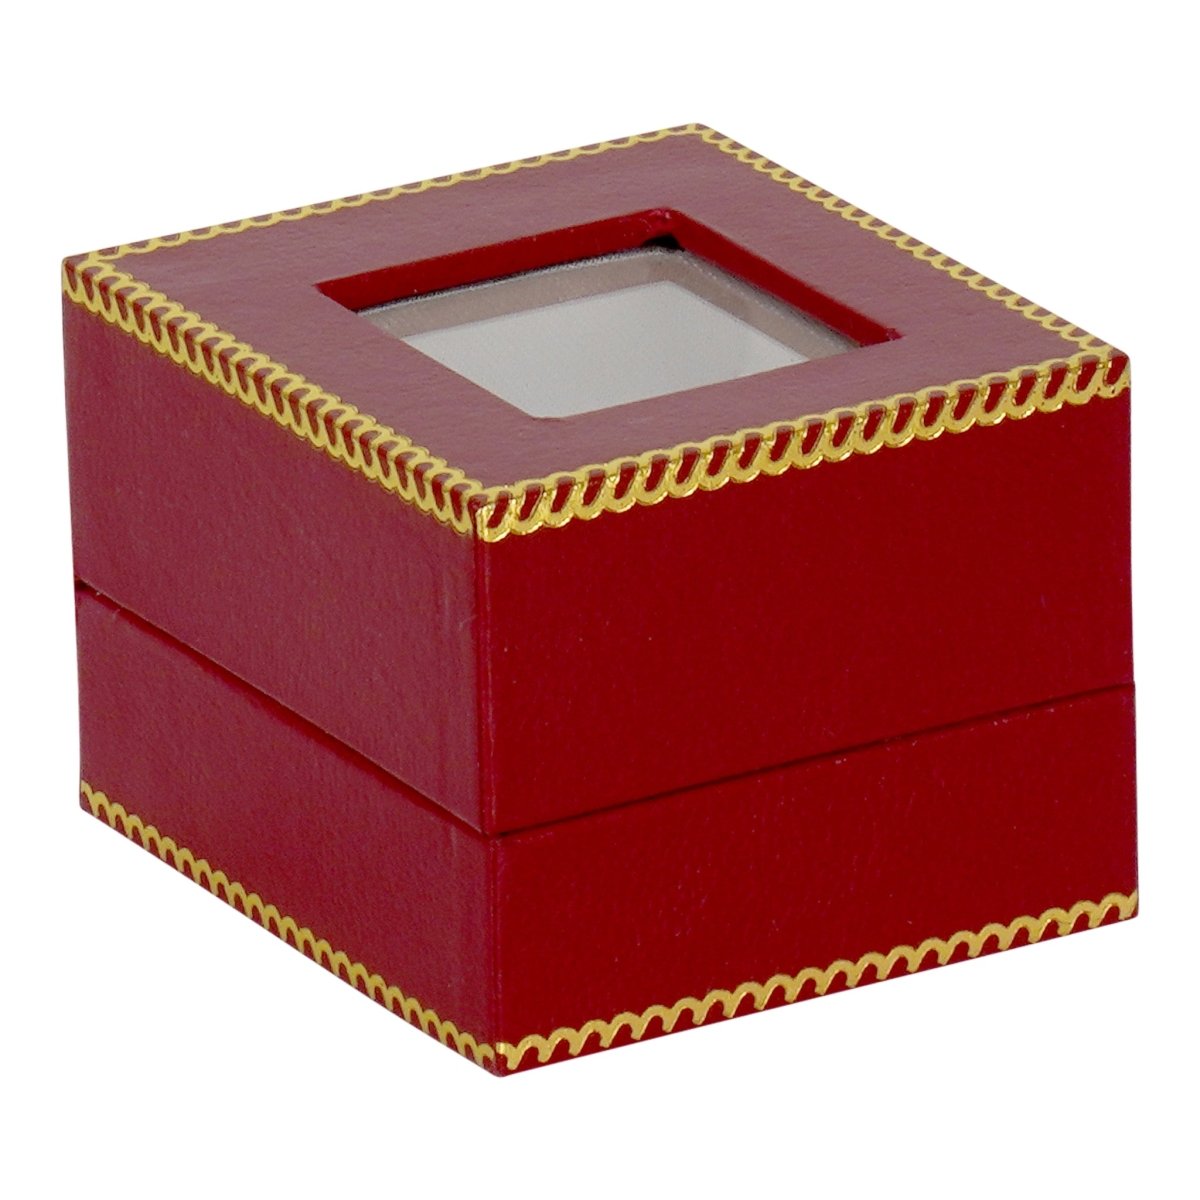 Window Leatherette Ring Box - Prestige and Fancy - Red